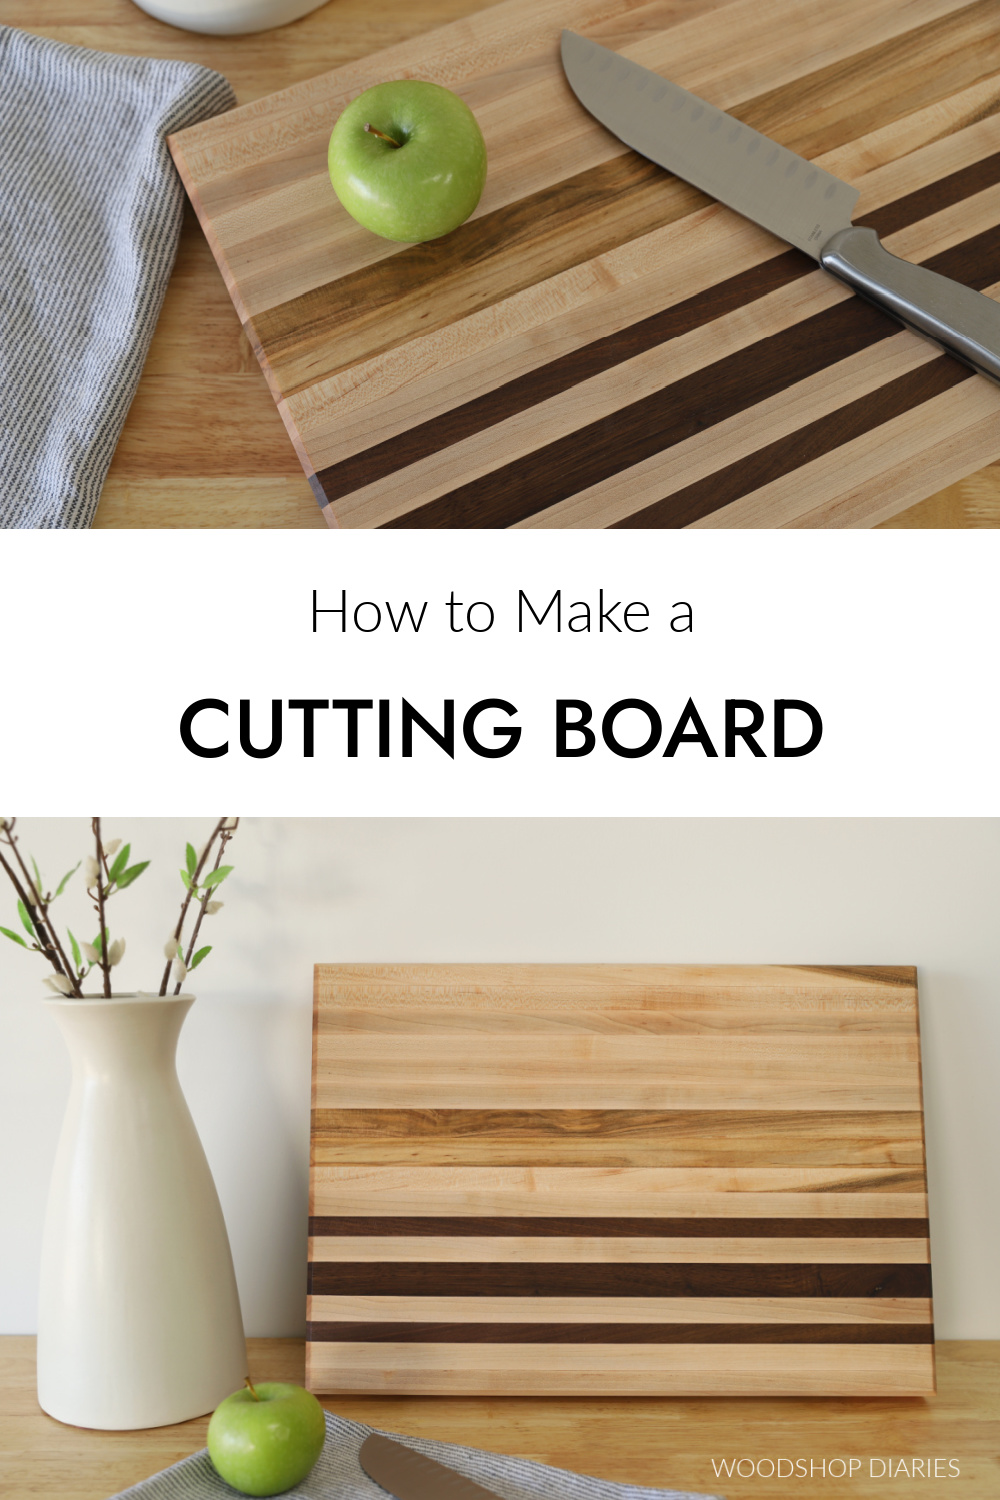 Pinterest collage showing overhead view of cutting board at top and cutting board leaning against white wall at bottom with text "how to make a cutting board"